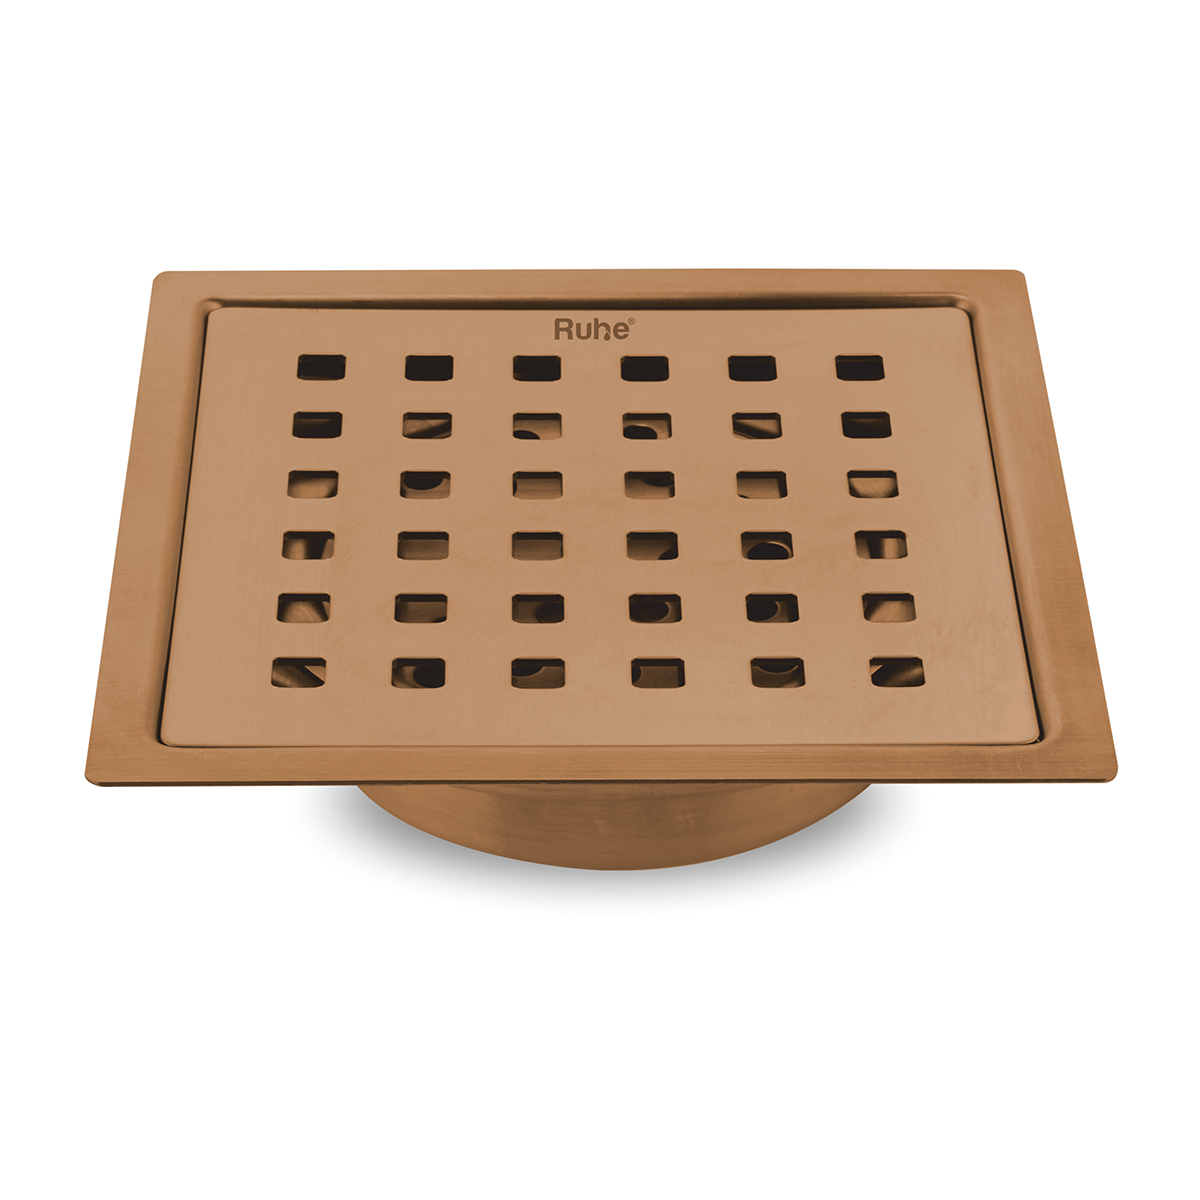 Pearl Square Flat Cut Floor Drain in Antique Copper PVD Coating (6 x 6 Inches)